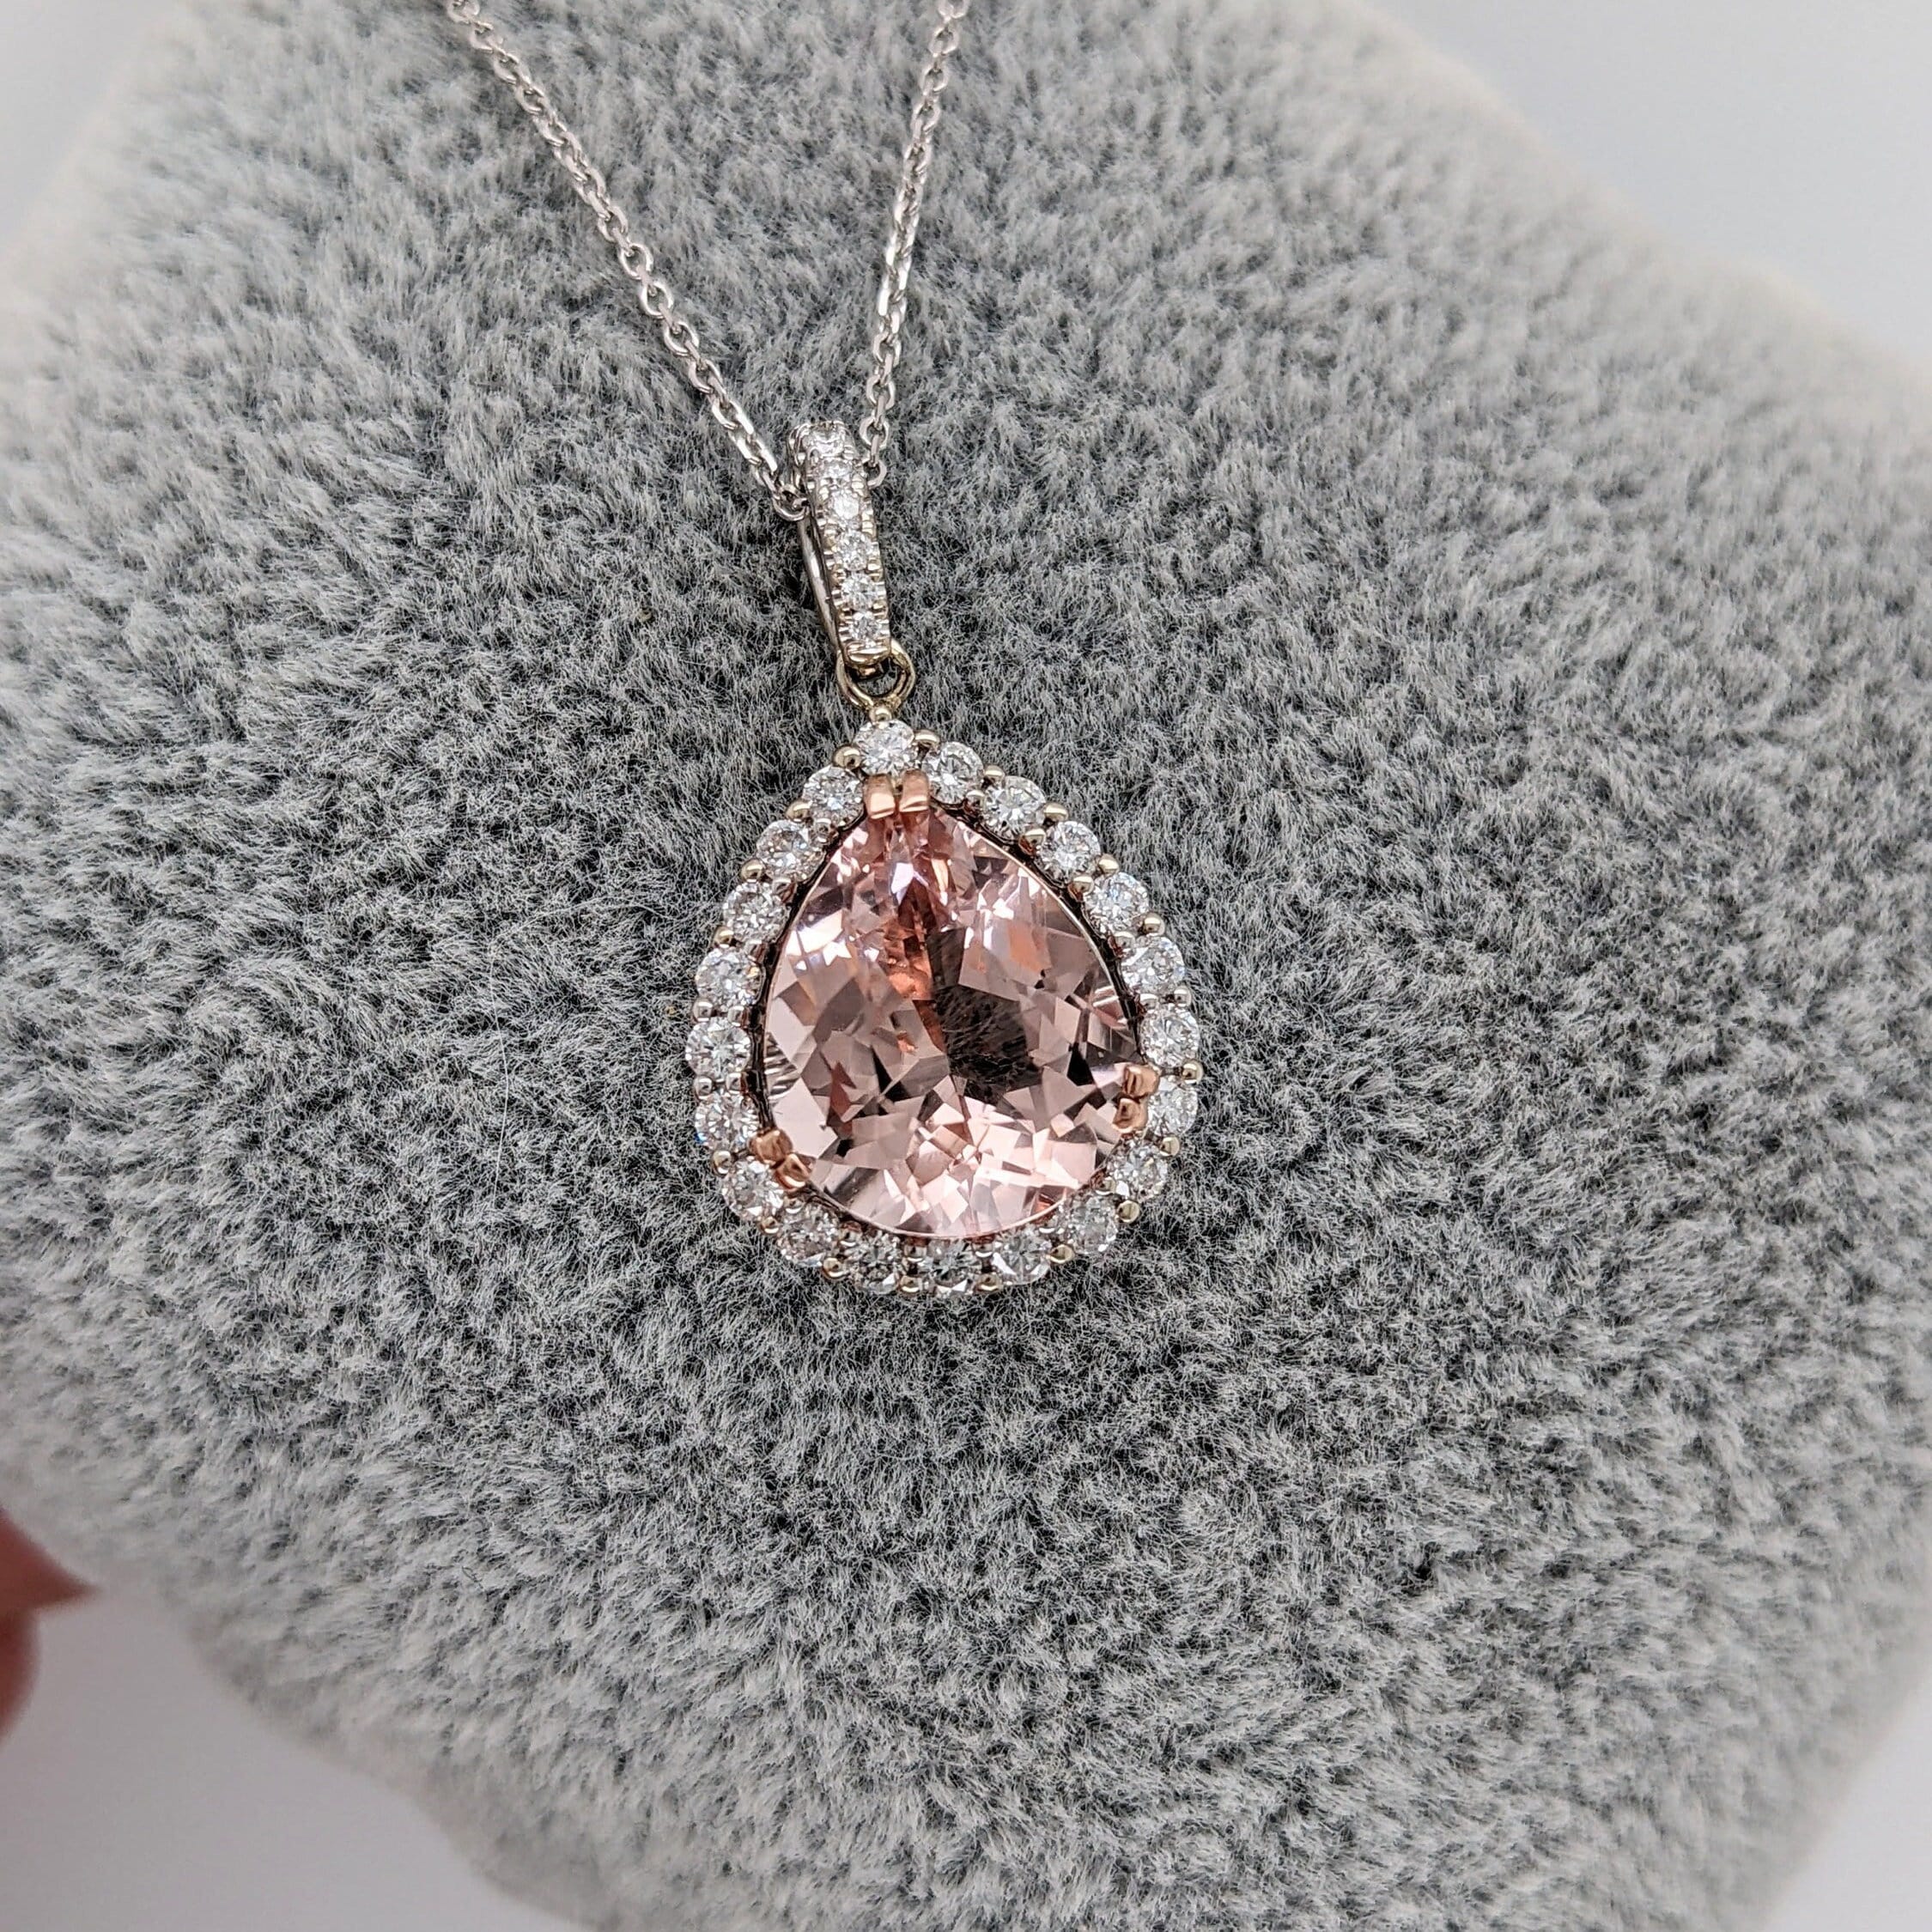 Pendants-Pink AAA Morganite Pendant in 14K Solid White Gold with Natural Diamond Accents | Pear Shape 12x10mm | October Birthstone | Ready to Ship! - NNJGemstones